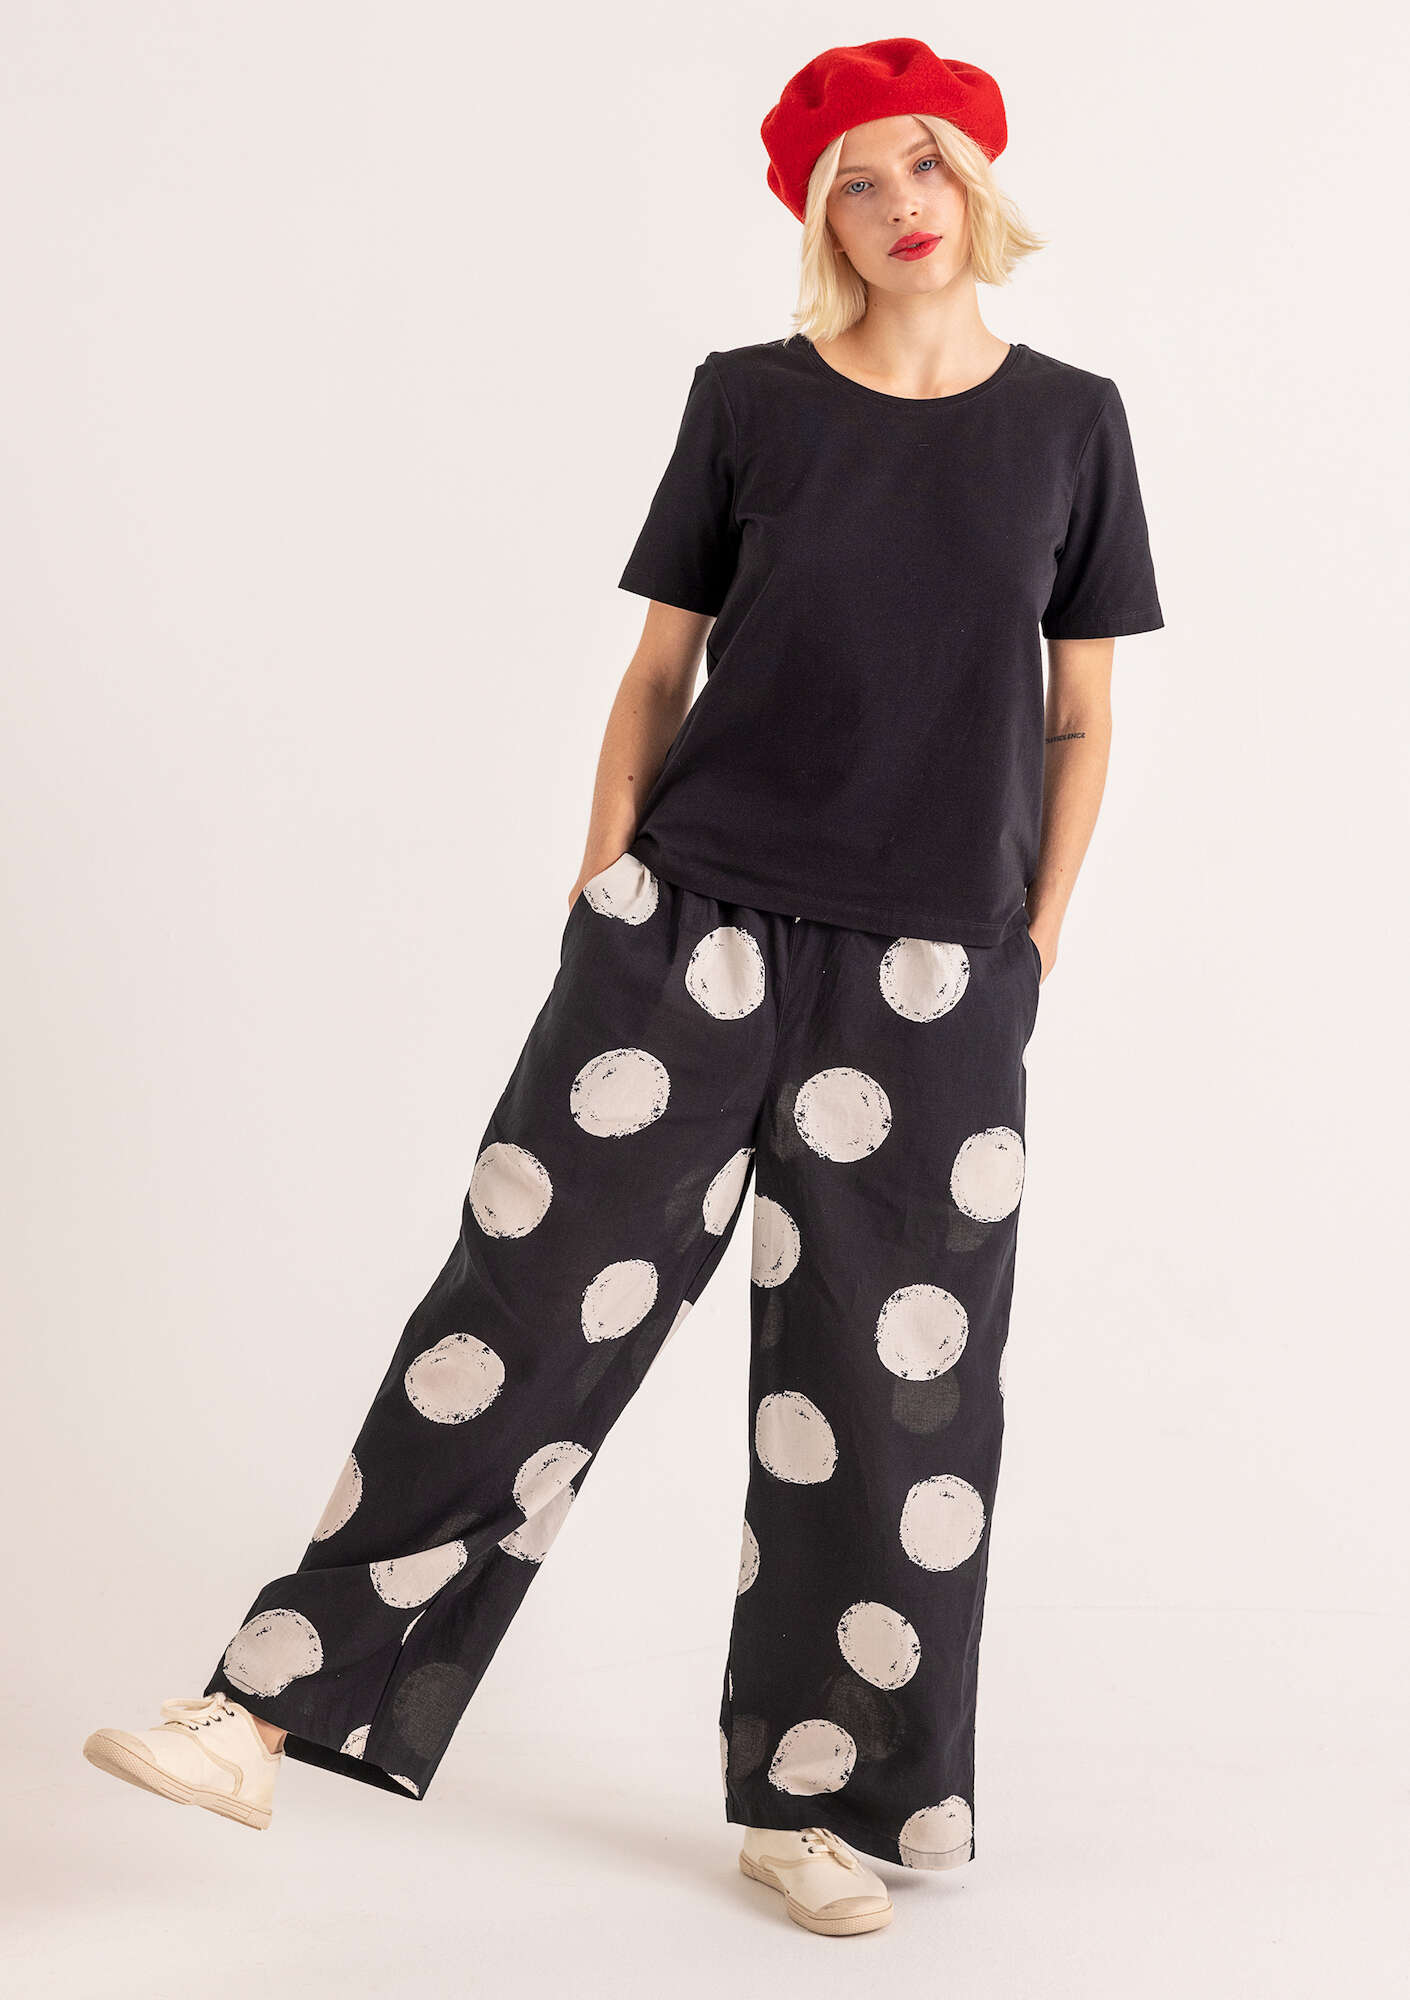  Woven “Palette” pants in organic cotton black/patterned